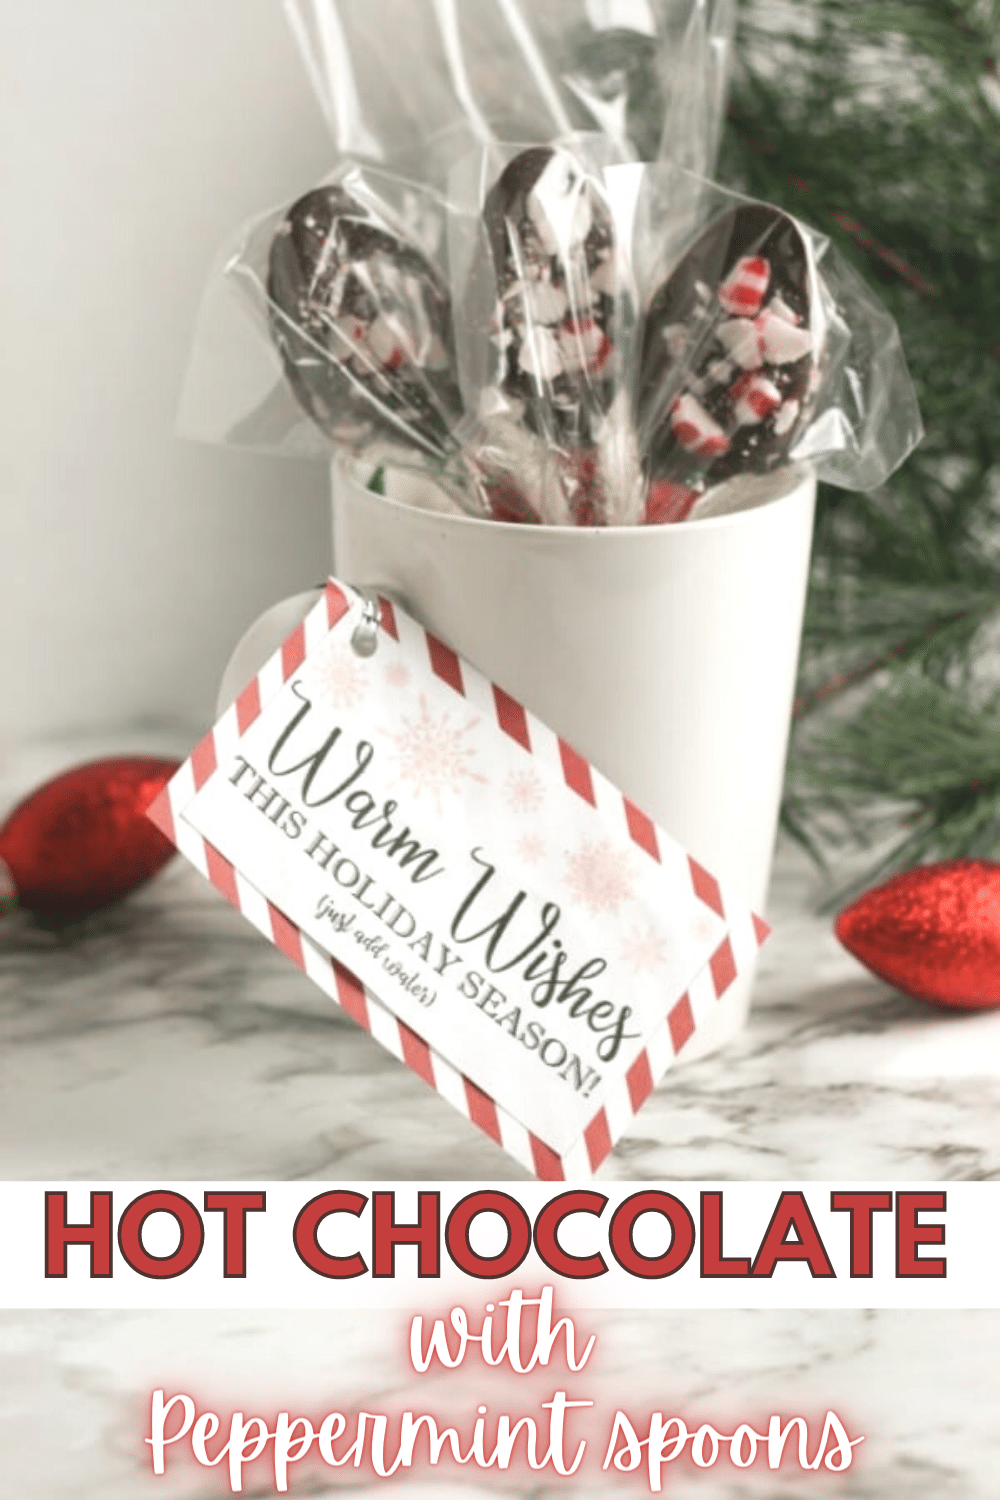 This DIY Hot Chocolate Gift idea is an easy and inexpensive gift that's perfect for almost everyone! Homemade cocoa mix with peppermint stirring spoons packaged in a mug. Free printable gift tag included! #giftideas #Christmas #hotchocolate via @wondermomwannab